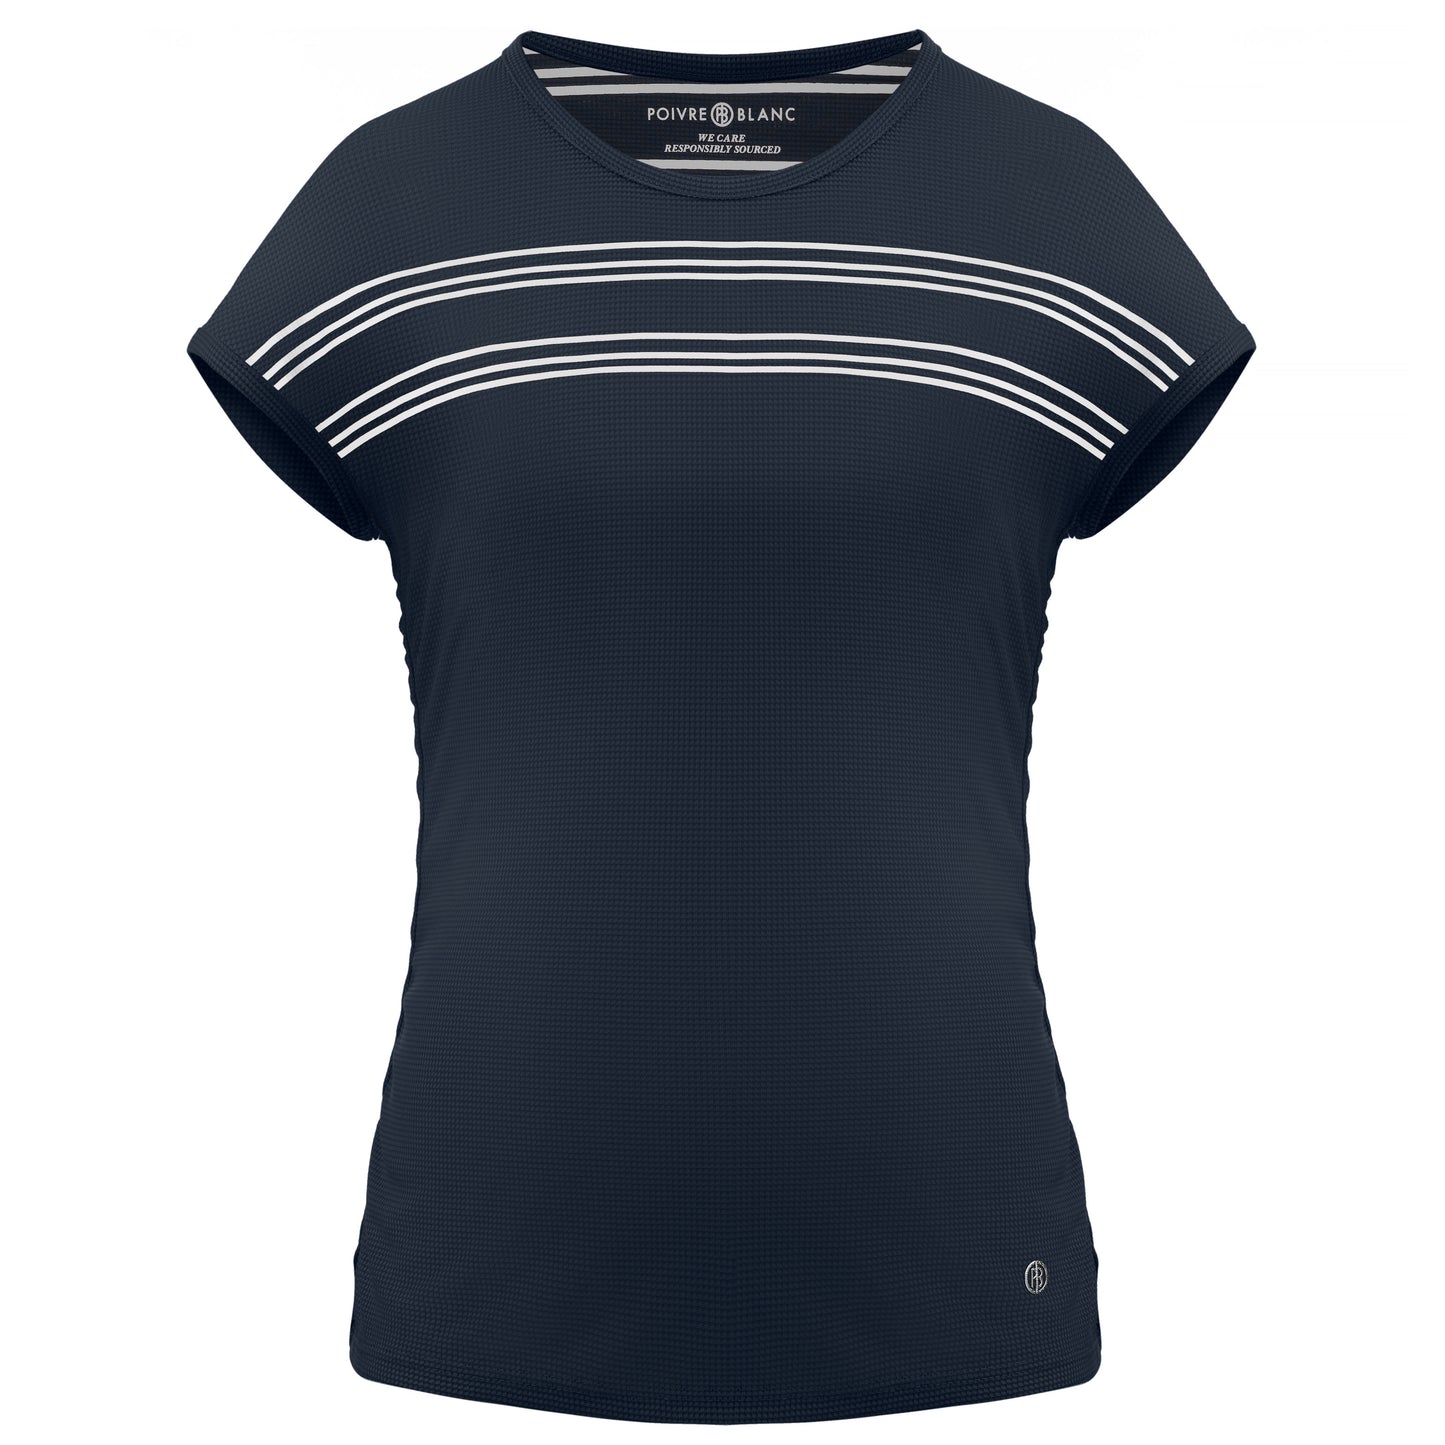 Women's Eco-Active Light capped sleeve T-shirt 2101 in Oxford Blue